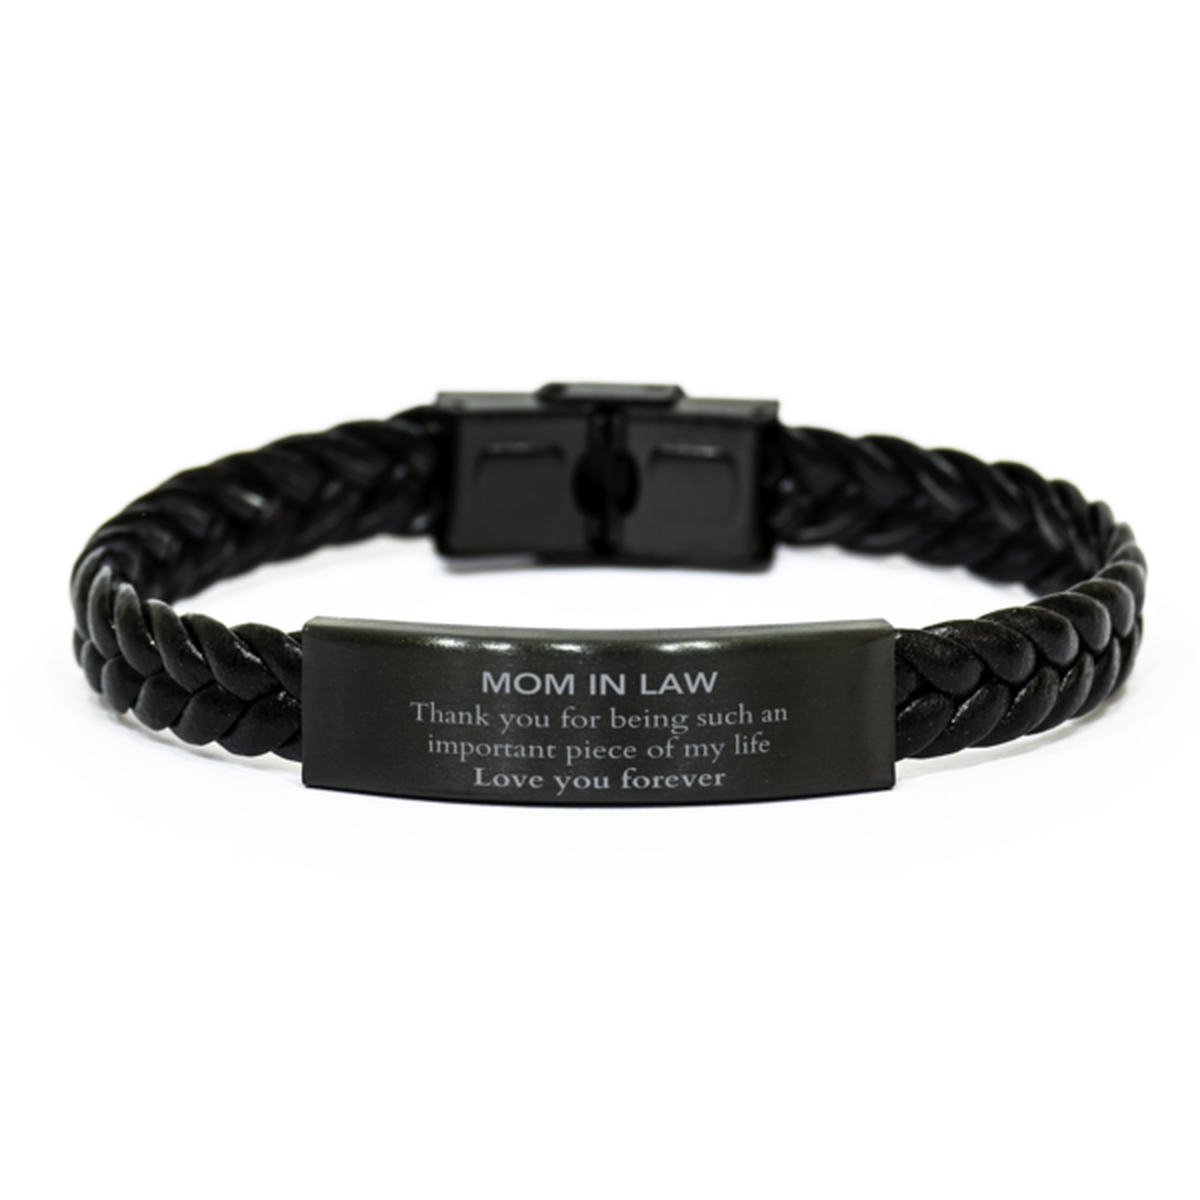 Appropriate Mom In Law Braided Leather Bracelet Epic Birthday Gifts for Mom In Law Thank you for being such an important piece of my life Mom In Law Christmas Mothers Fathers Day